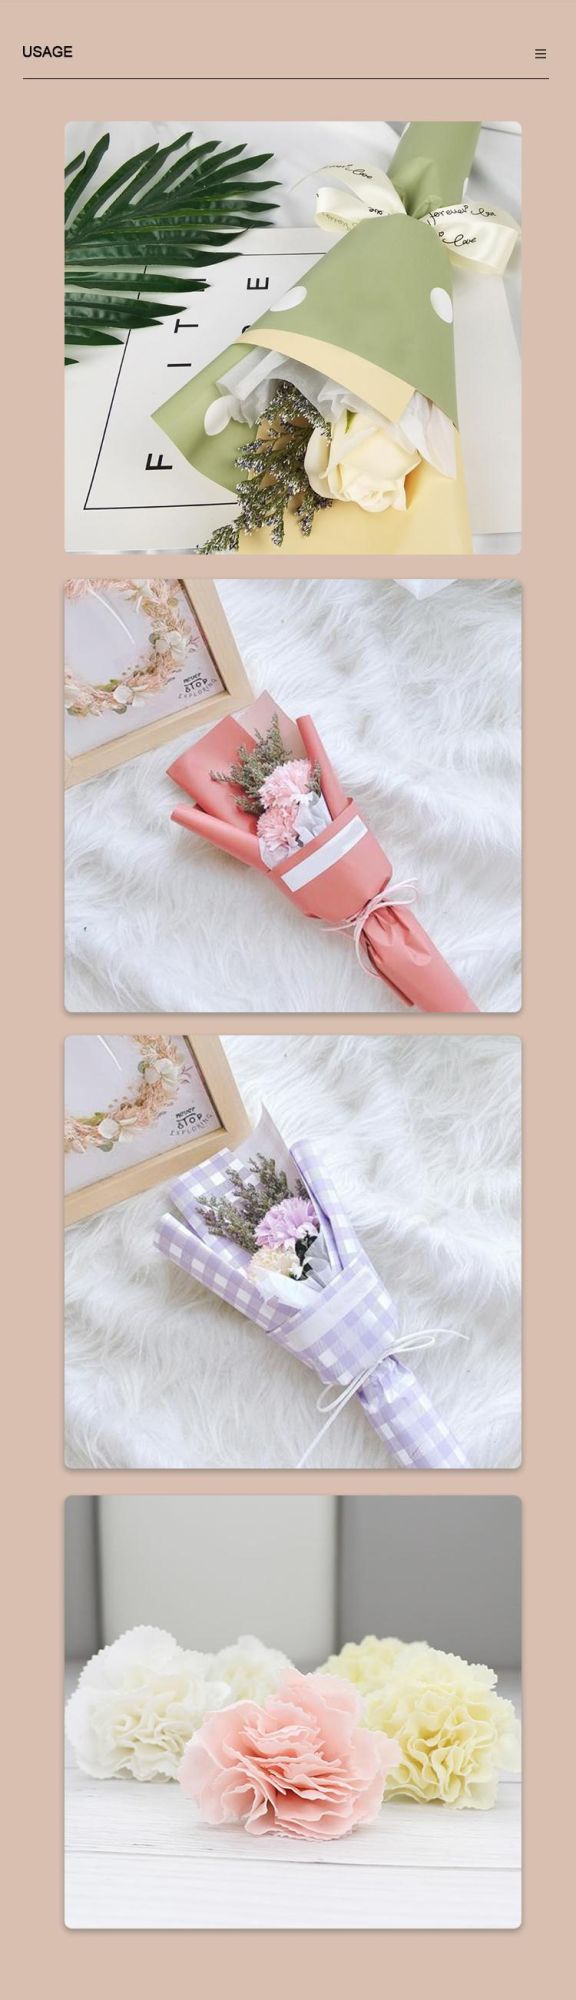 Factory Cheaper Soap Flower Gift Soap Carnation Flower for Valentine′s Day, Christmas, Mother′s Day, Anniversary